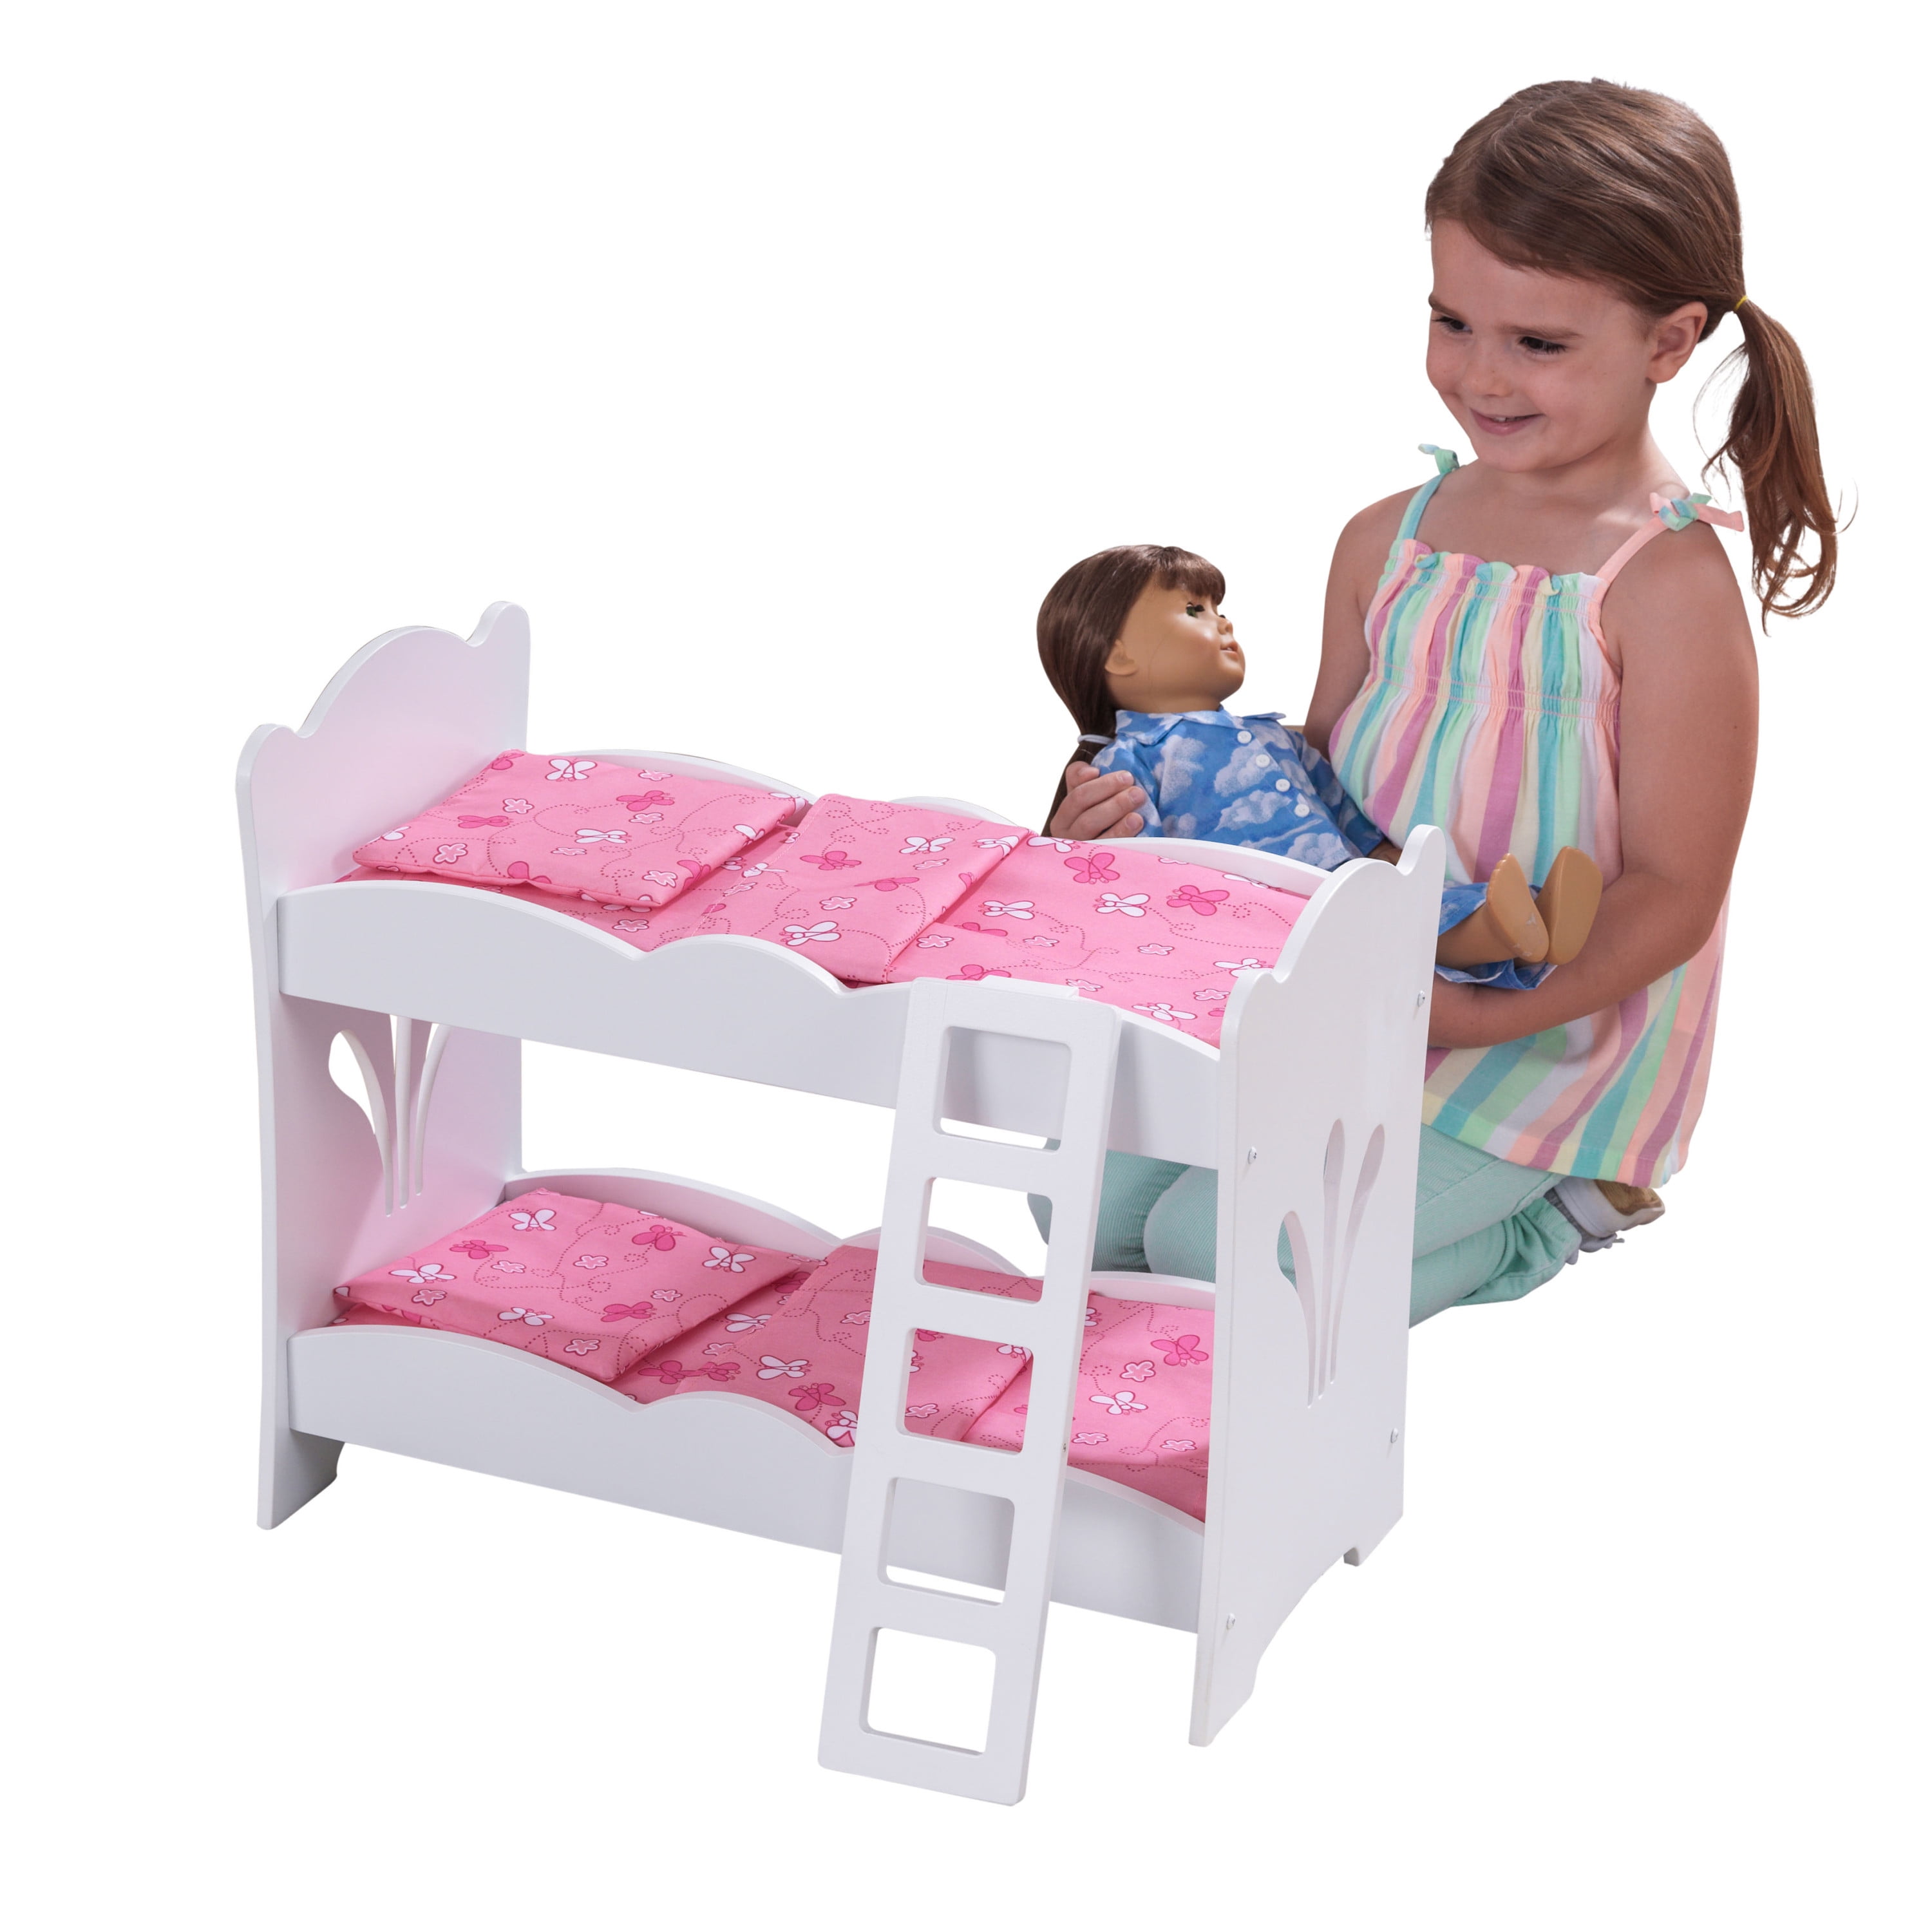 White Wooden Doll Bunk Bed for Baby Toys Playcenter Children Dolls Home Furniture with Pink Bed Set